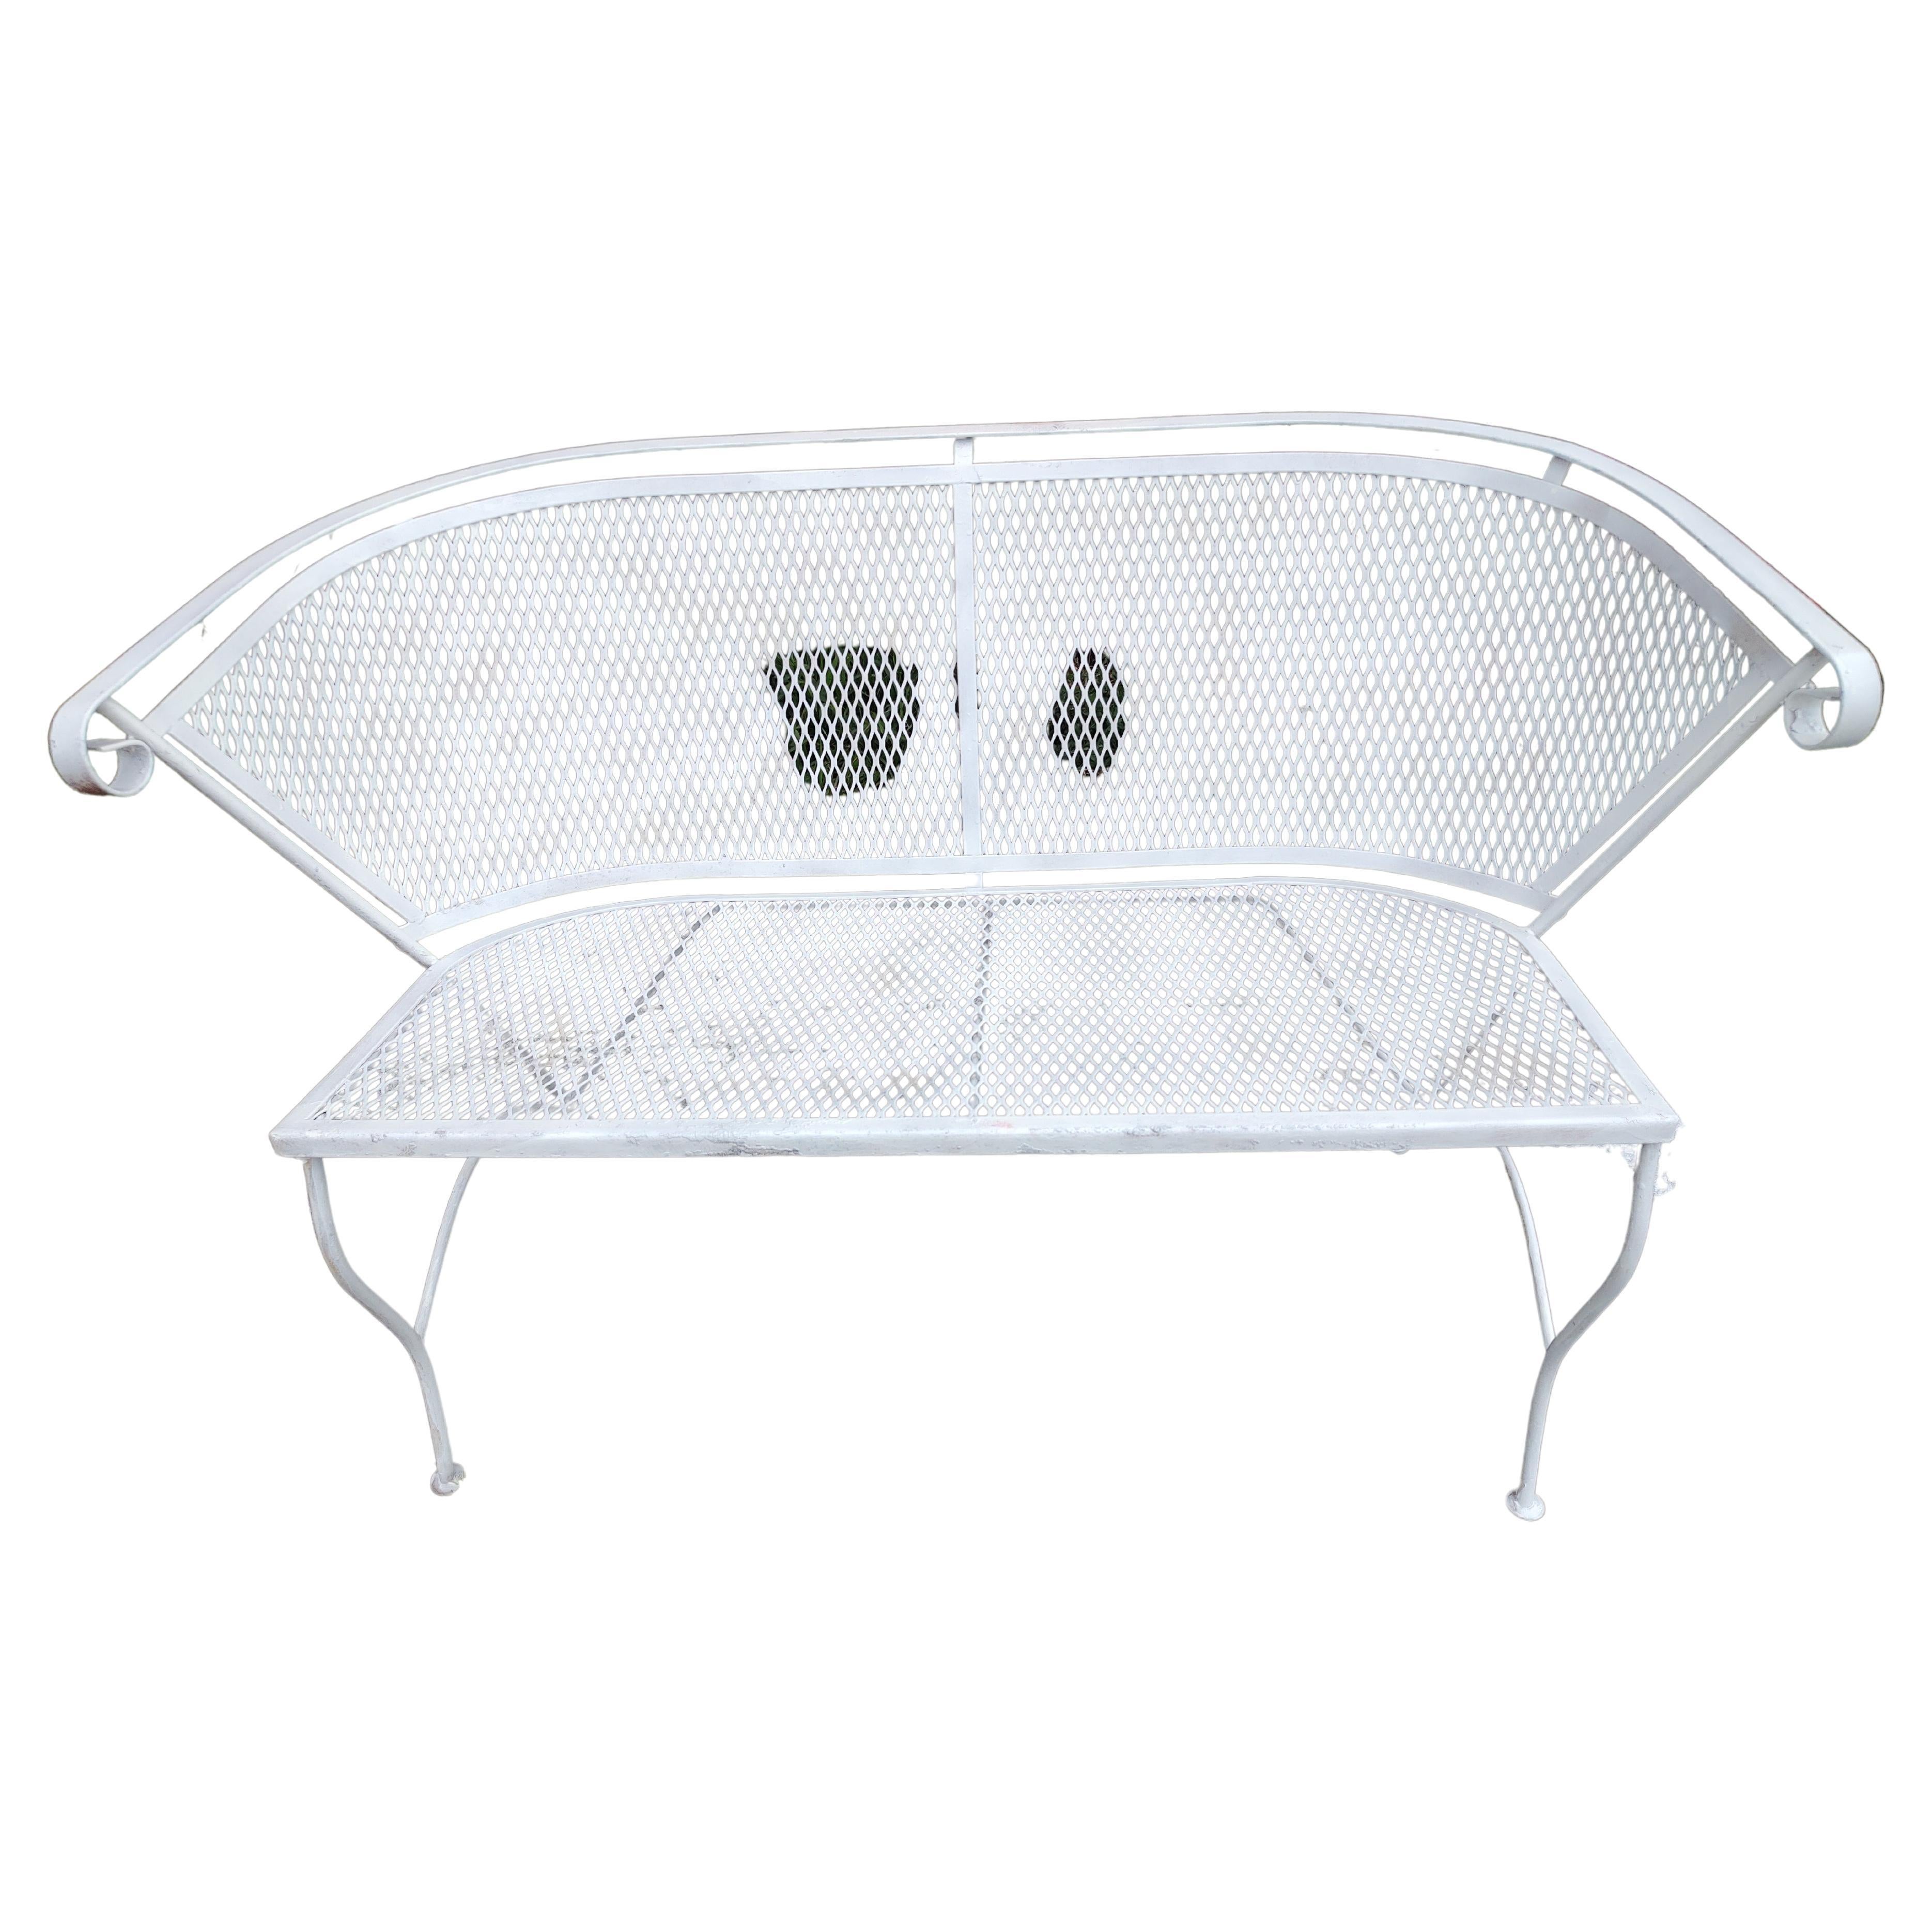 Petite two seat outdoor garden bench with mesh seat & back attributed to Russell Woodard co. Recently sprayed white so it's its in very good vintage condition with minimal wear, no rust. Seat clamps into place so it's easy to store in off season. We